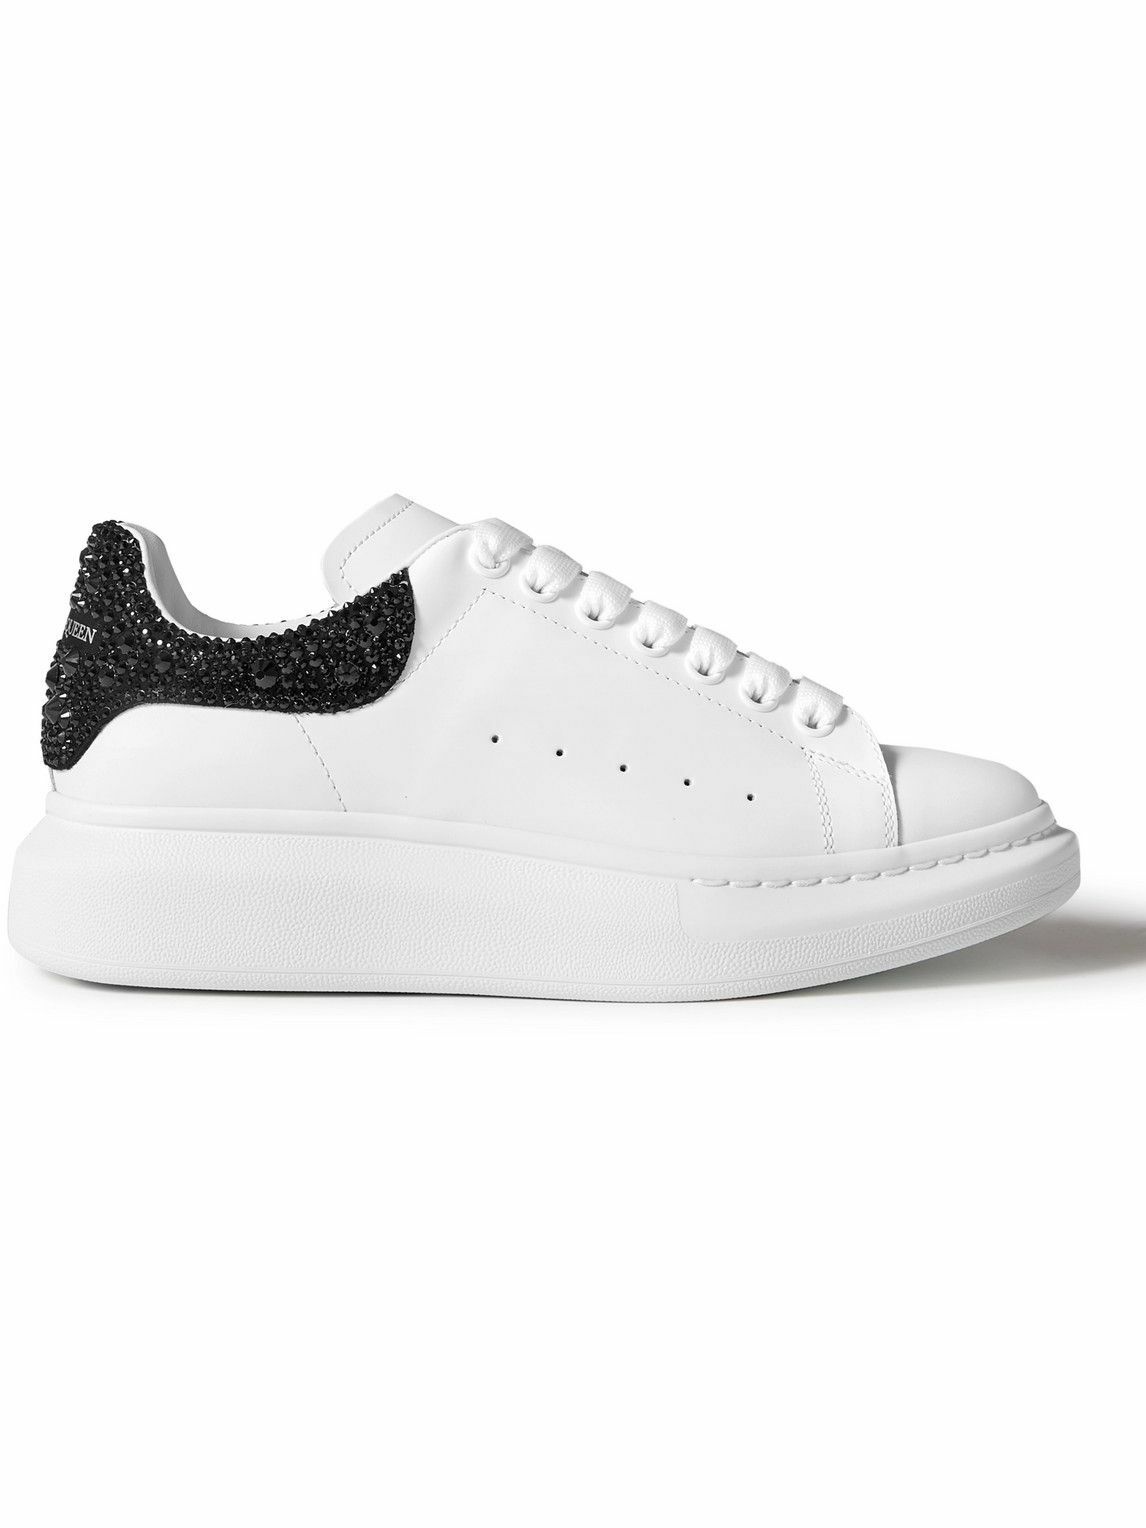 Alexander McQueen - Studded Exaggerated-Sole Leather Sneakers - White ...